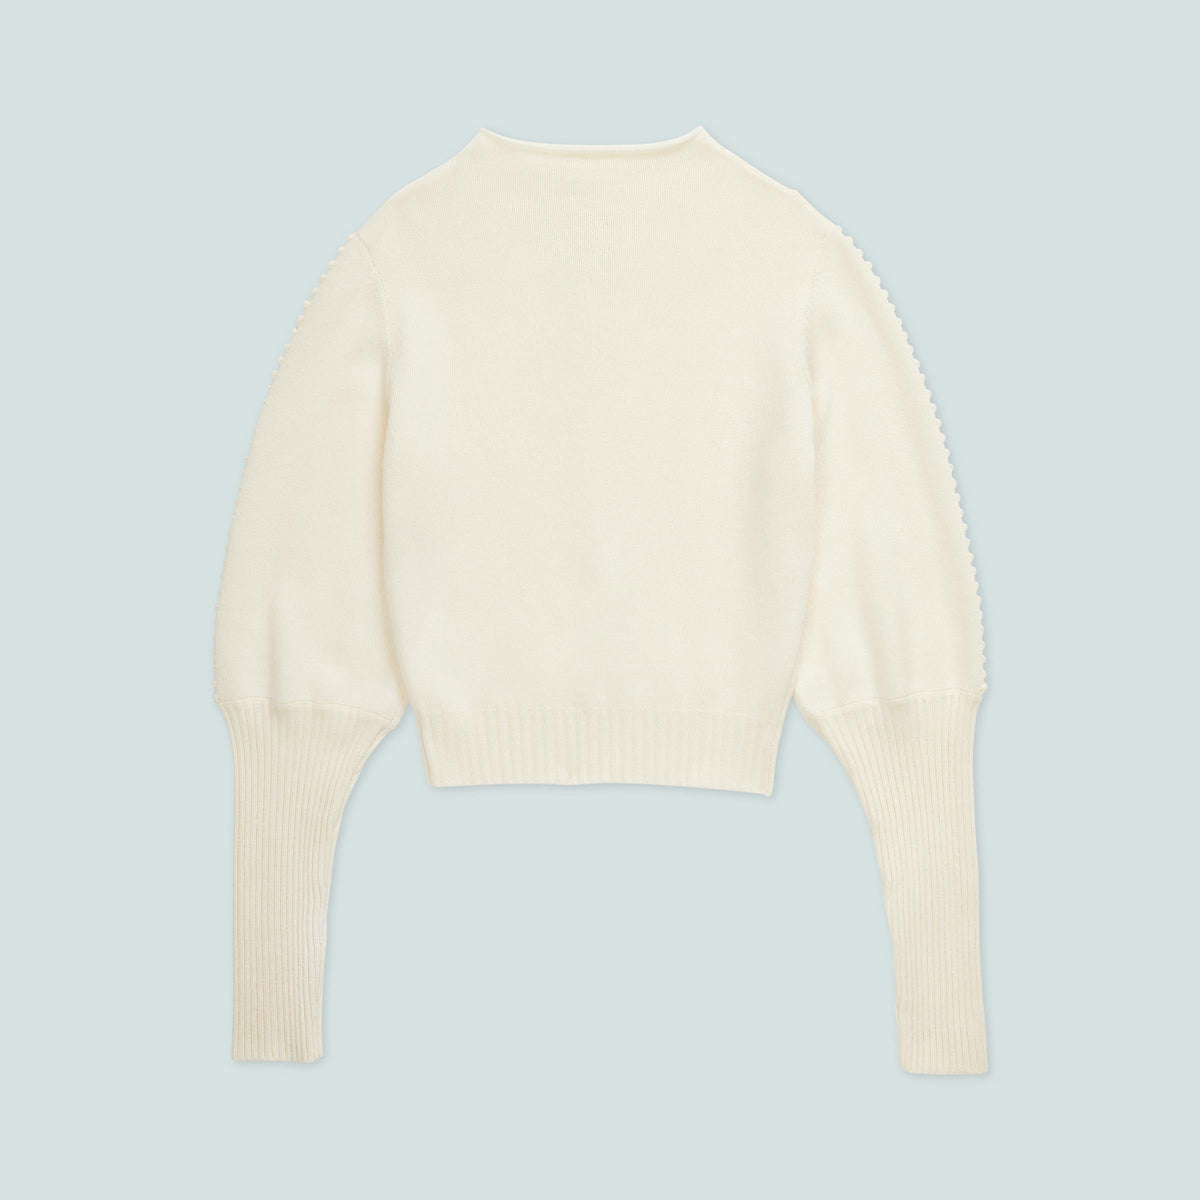 The Chelsea Sweater in White